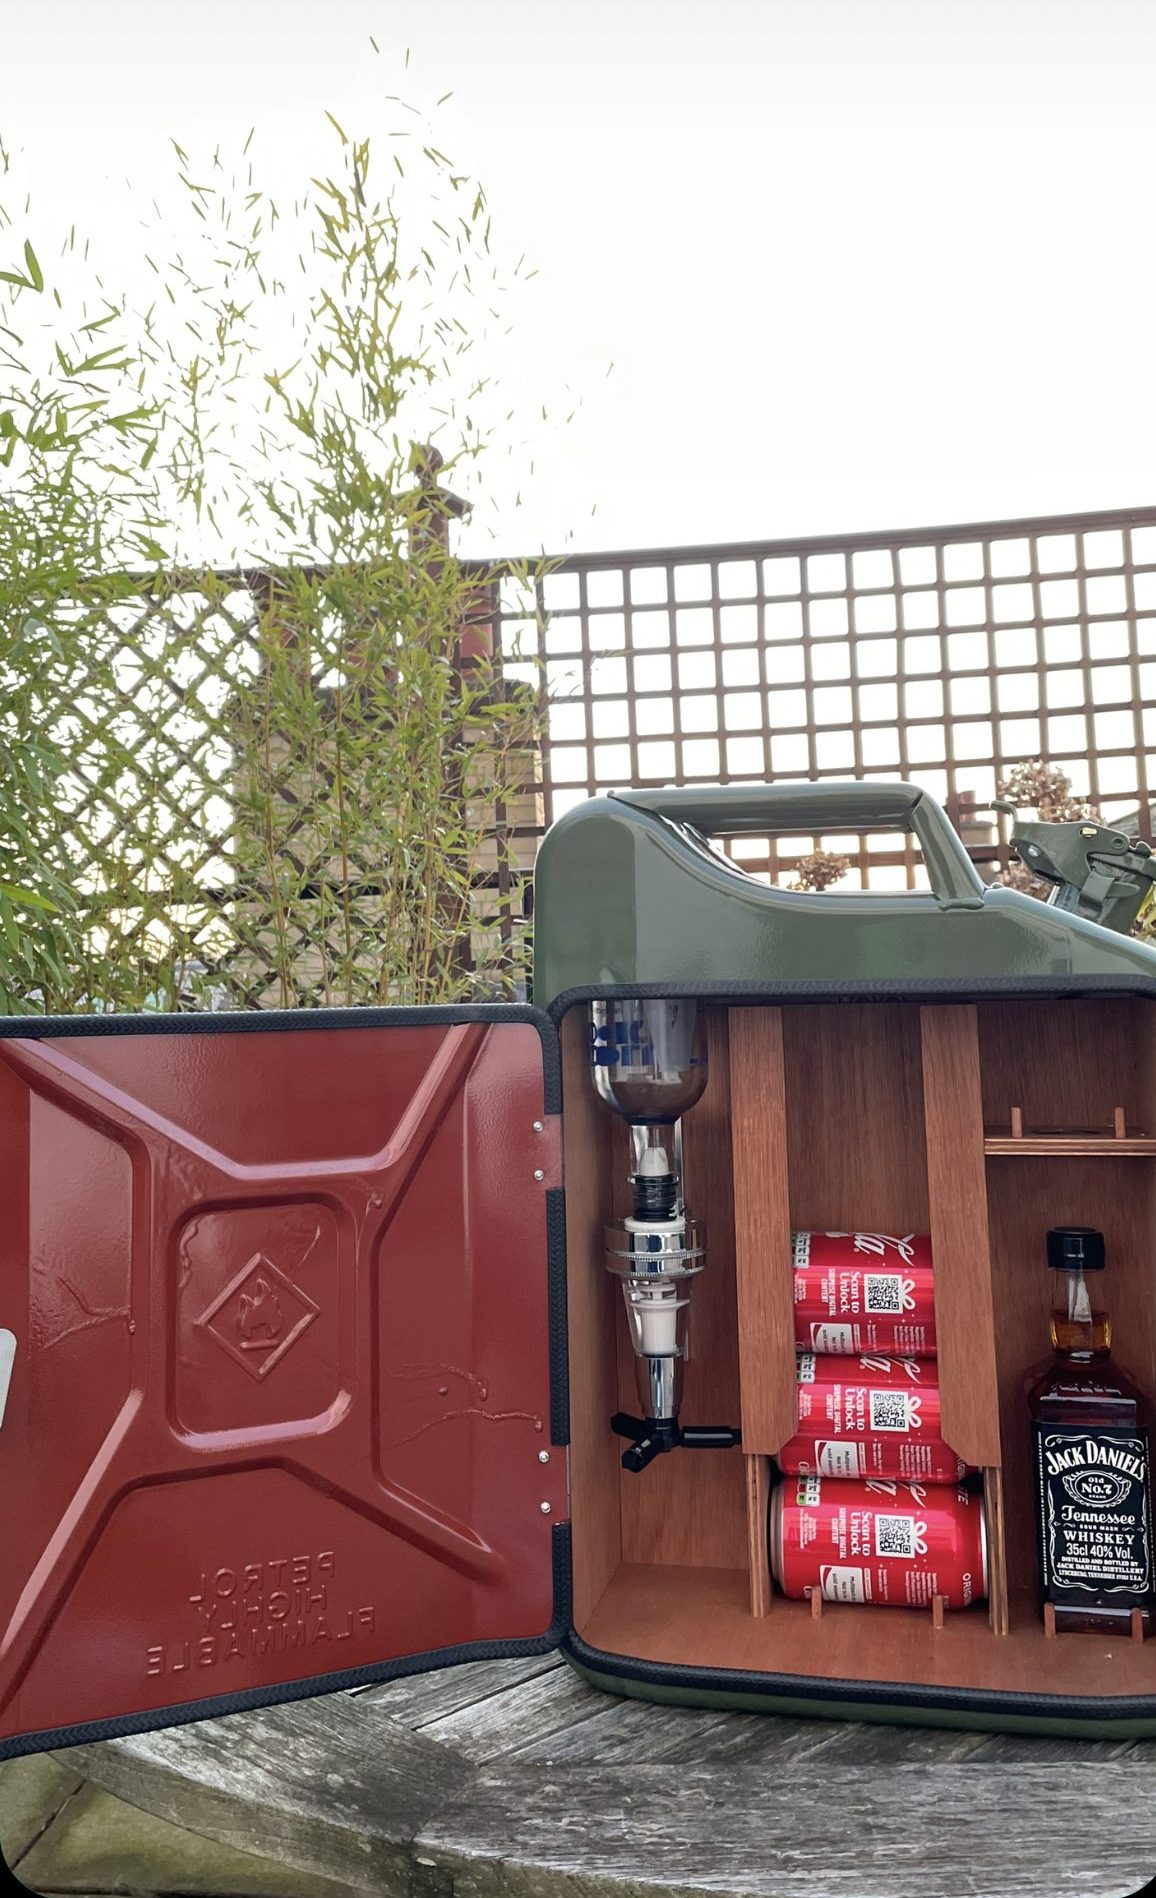 Jerry can bar